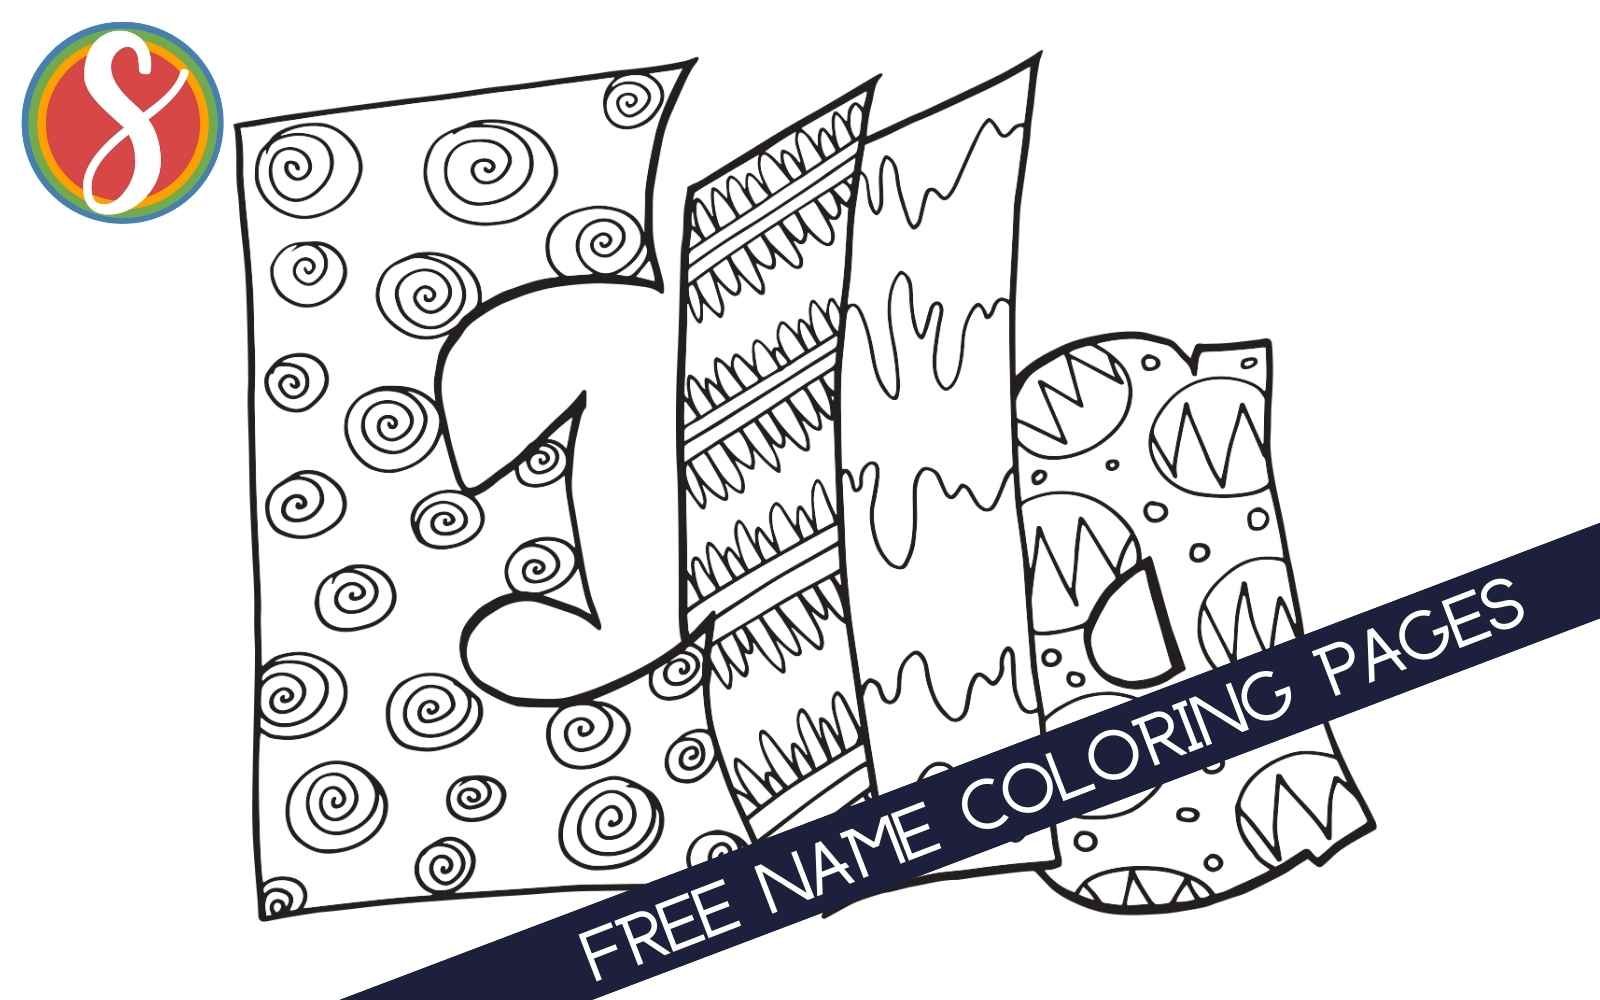 Free name coloring pages â stevie doodles